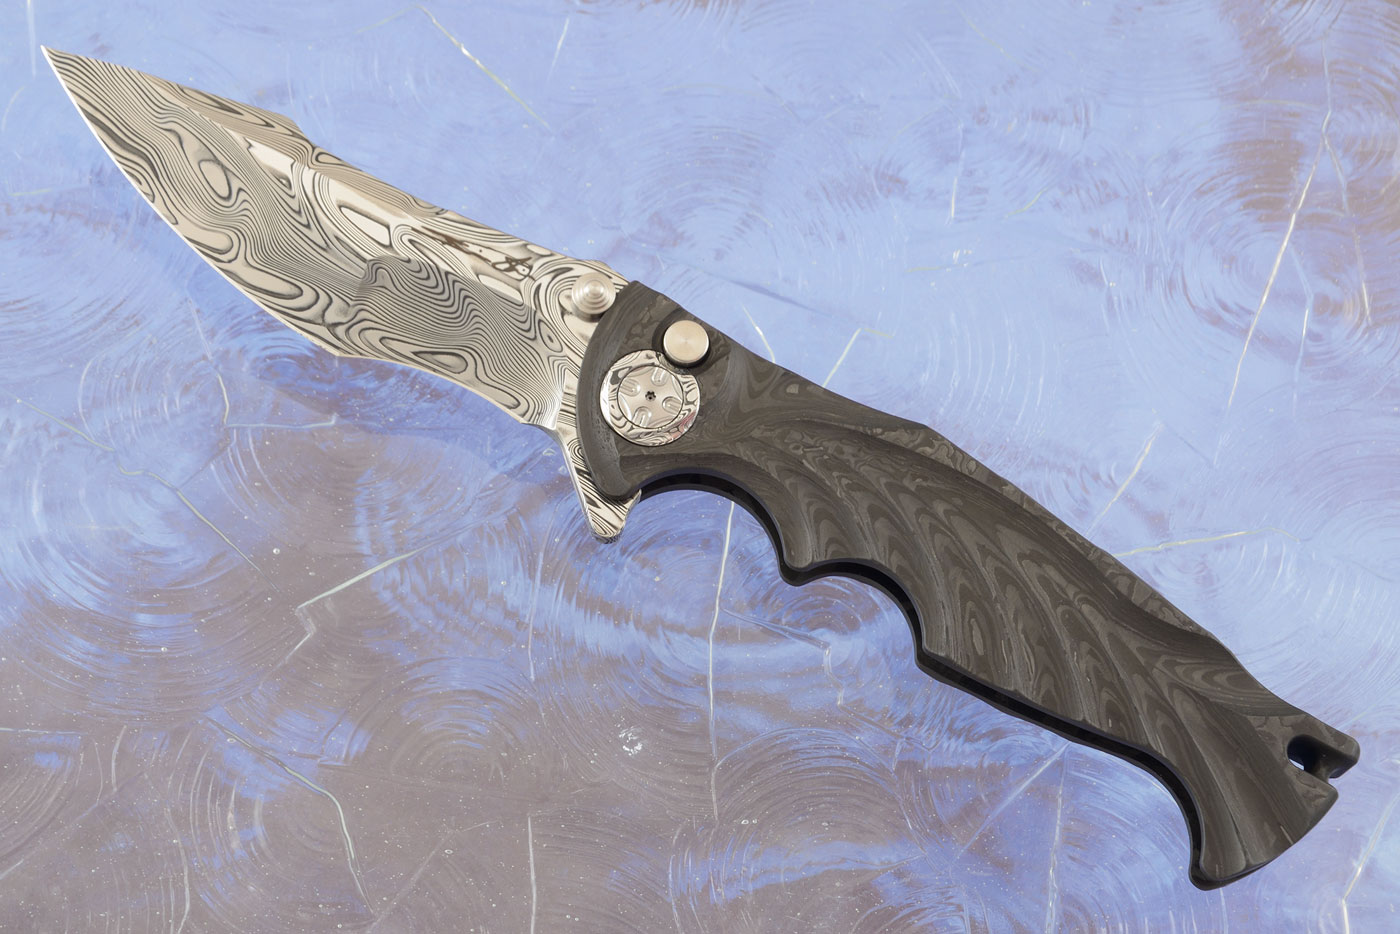 Tighe Breaker Integral with Uni-Directional Carbon Fiber and Damasteel